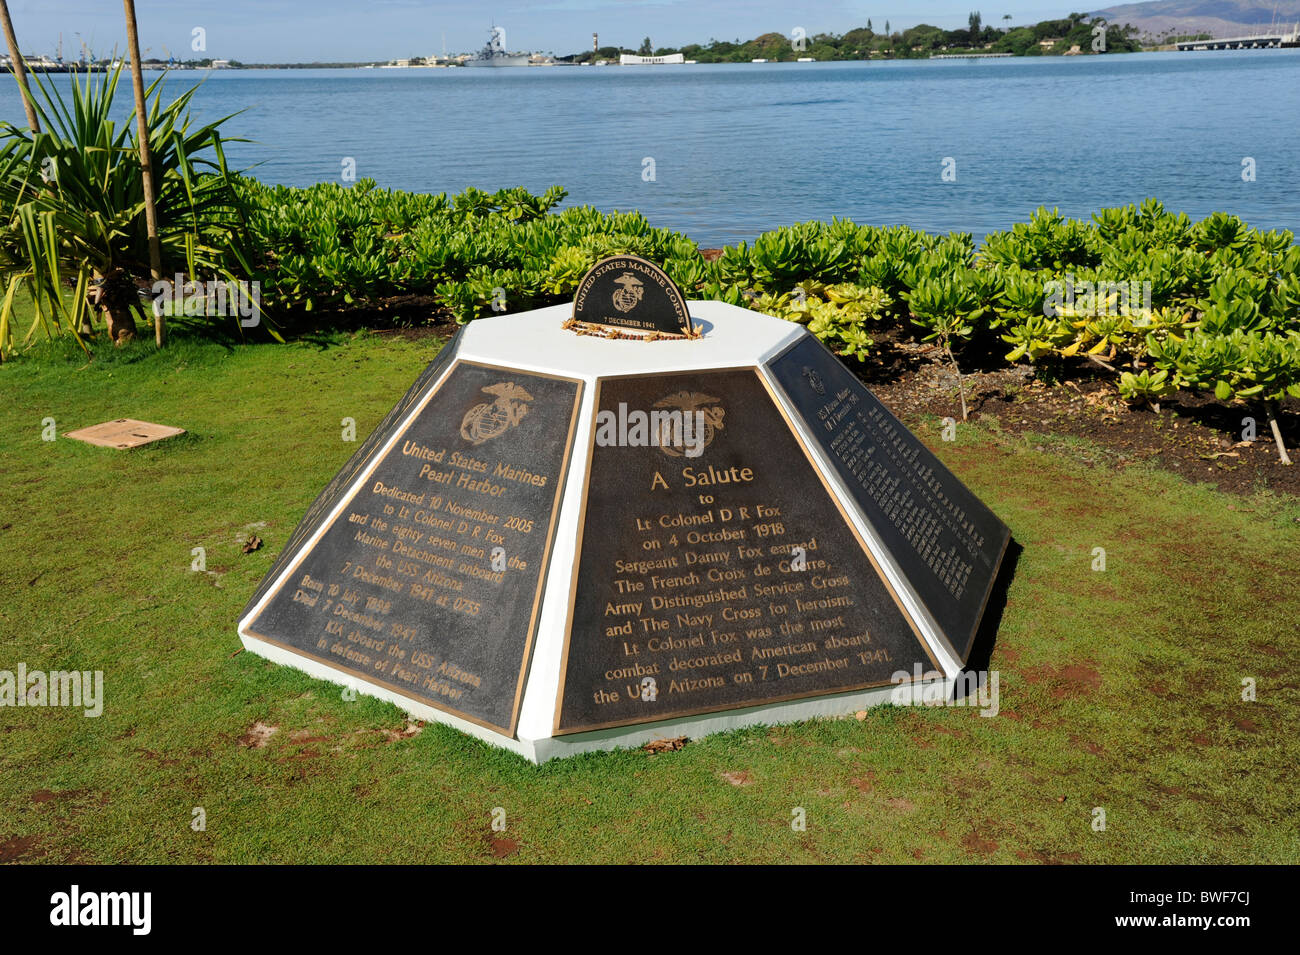 Memorial Marine Pearl Harbor Hawaii Pacific National Monument Banque D'Images